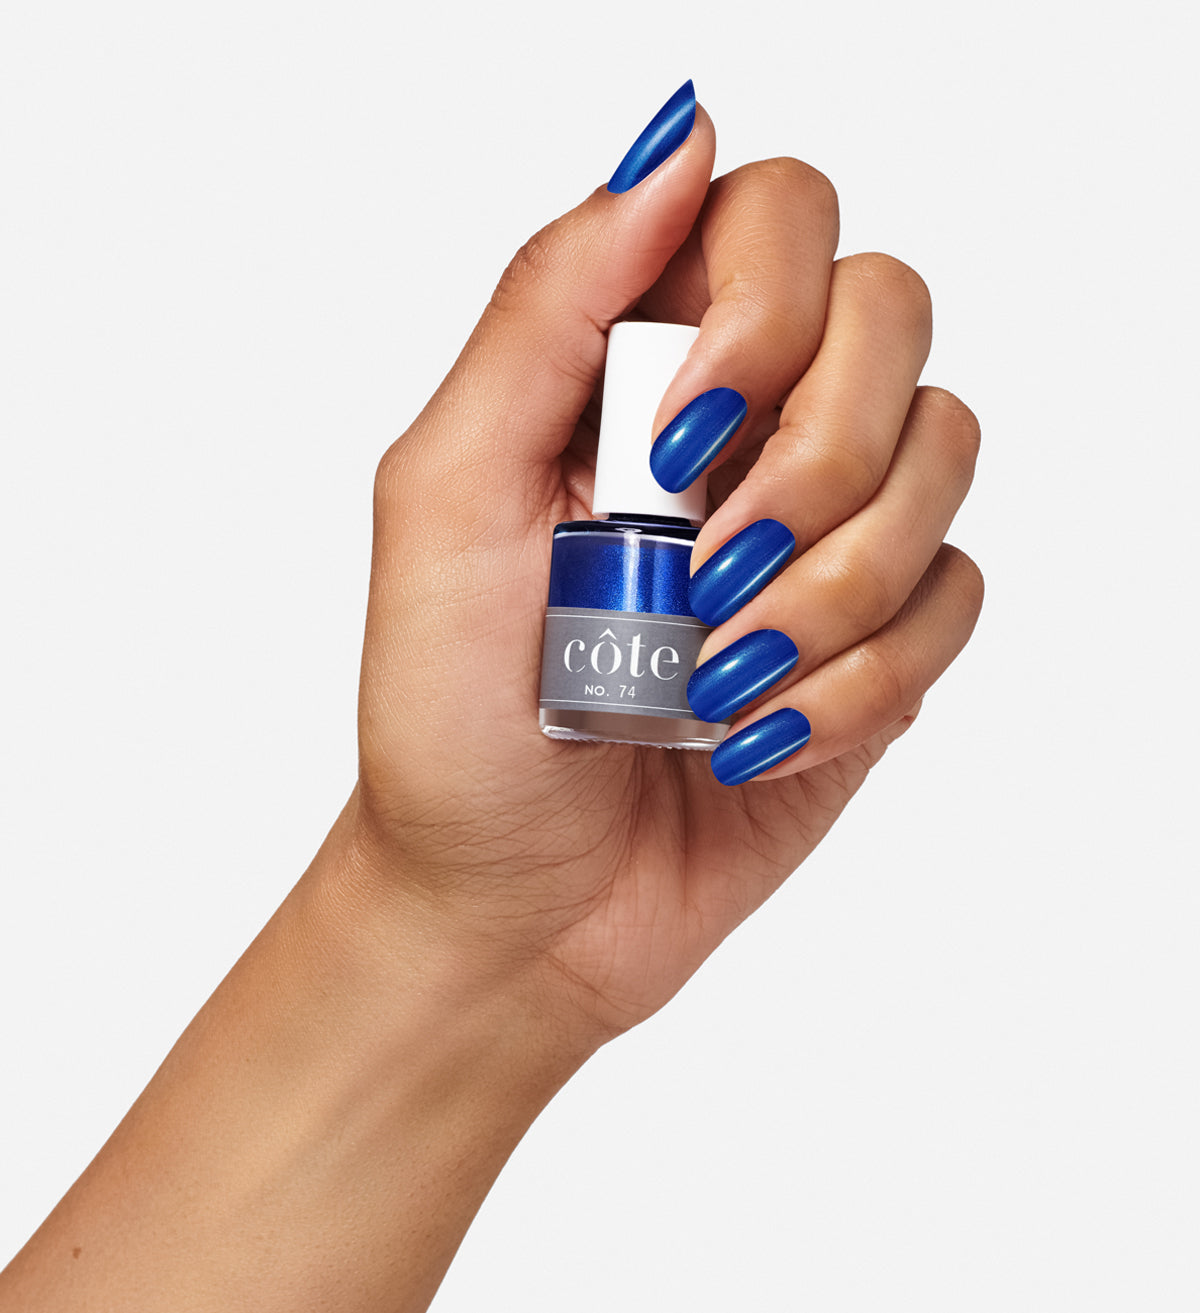 GFSU MATTE FINISH NAIL PAINT WITH QUICK DRY FORMULATION LIGHT BLUE BLUE -  Price in India, Buy GFSU MATTE FINISH NAIL PAINT WITH QUICK DRY FORMULATION  LIGHT BLUE BLUE Online In India,